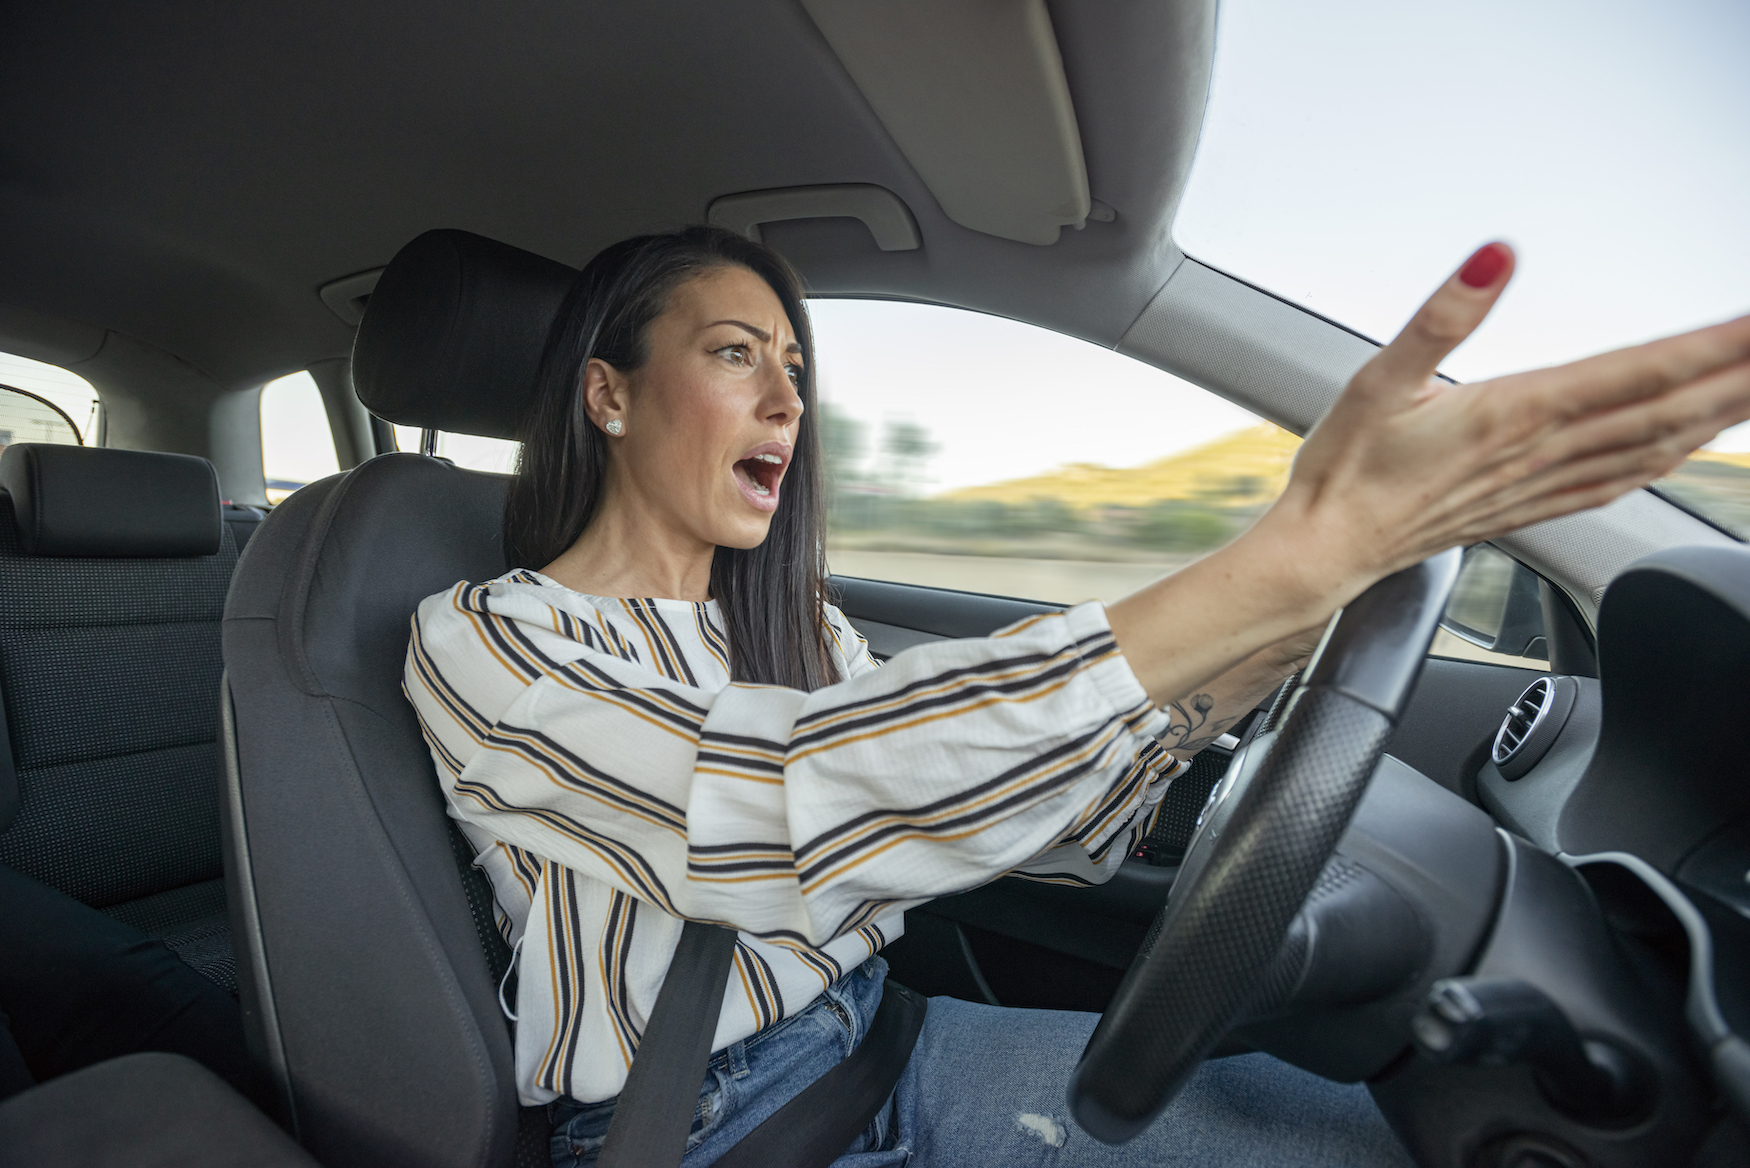 A woman outraged while behind the wheel of her car